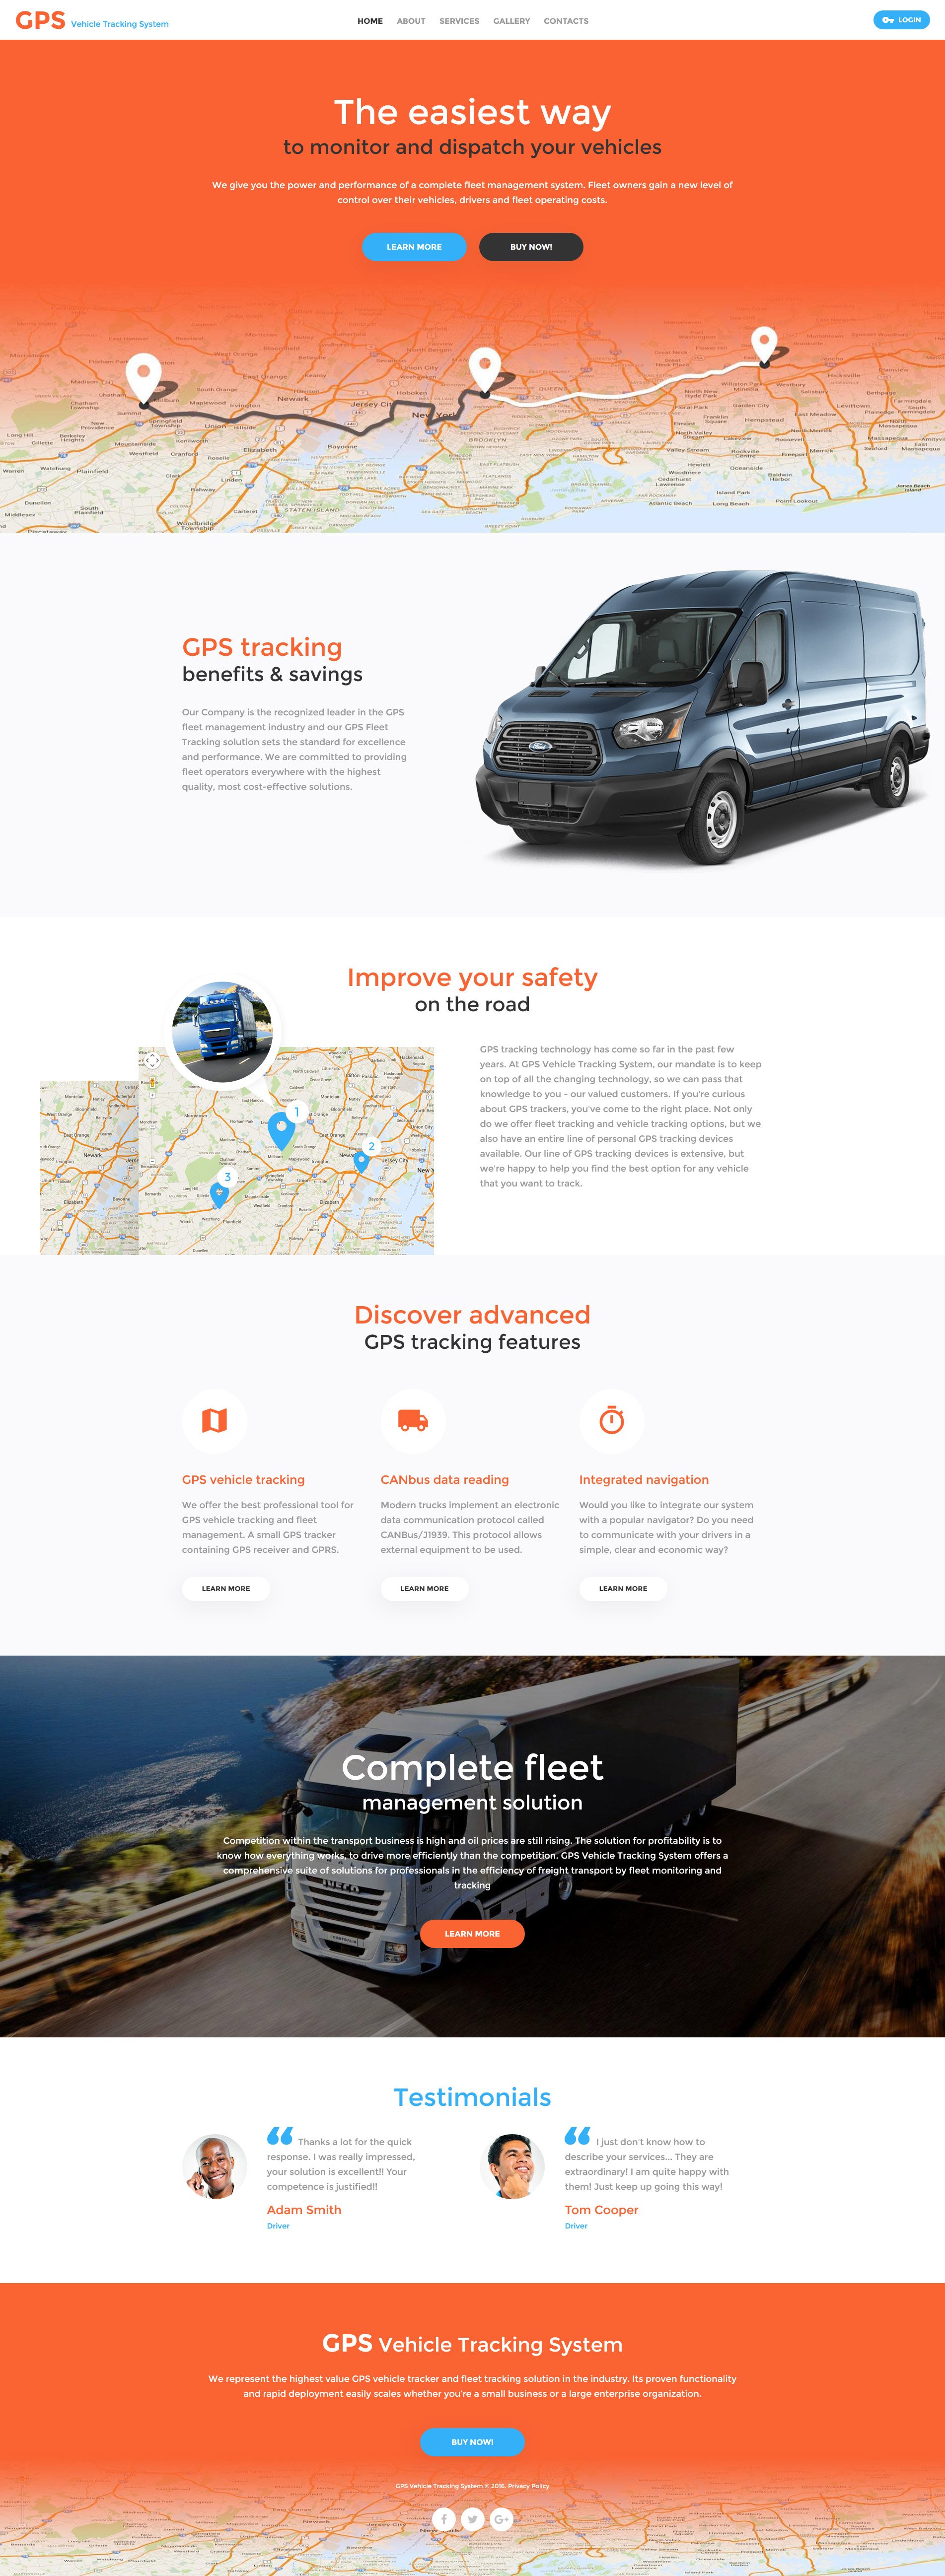 GPS Vehicle Tracking System Website Template